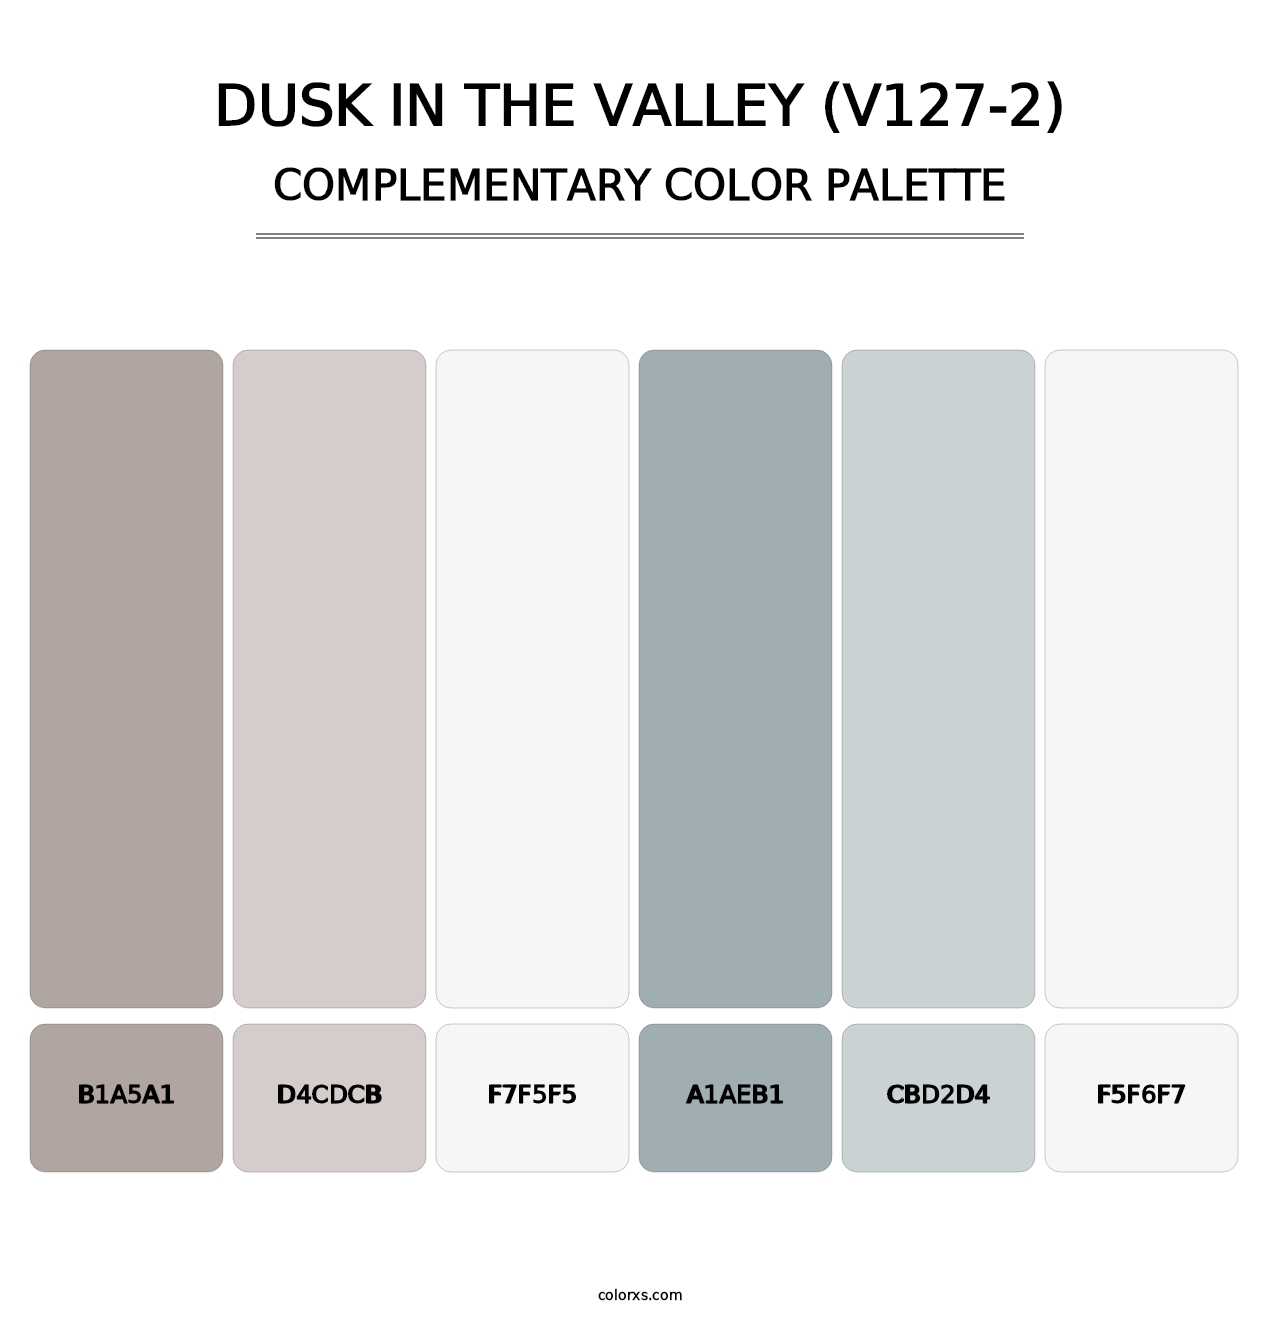 Dusk in the Valley (V127-2) - Complementary Color Palette